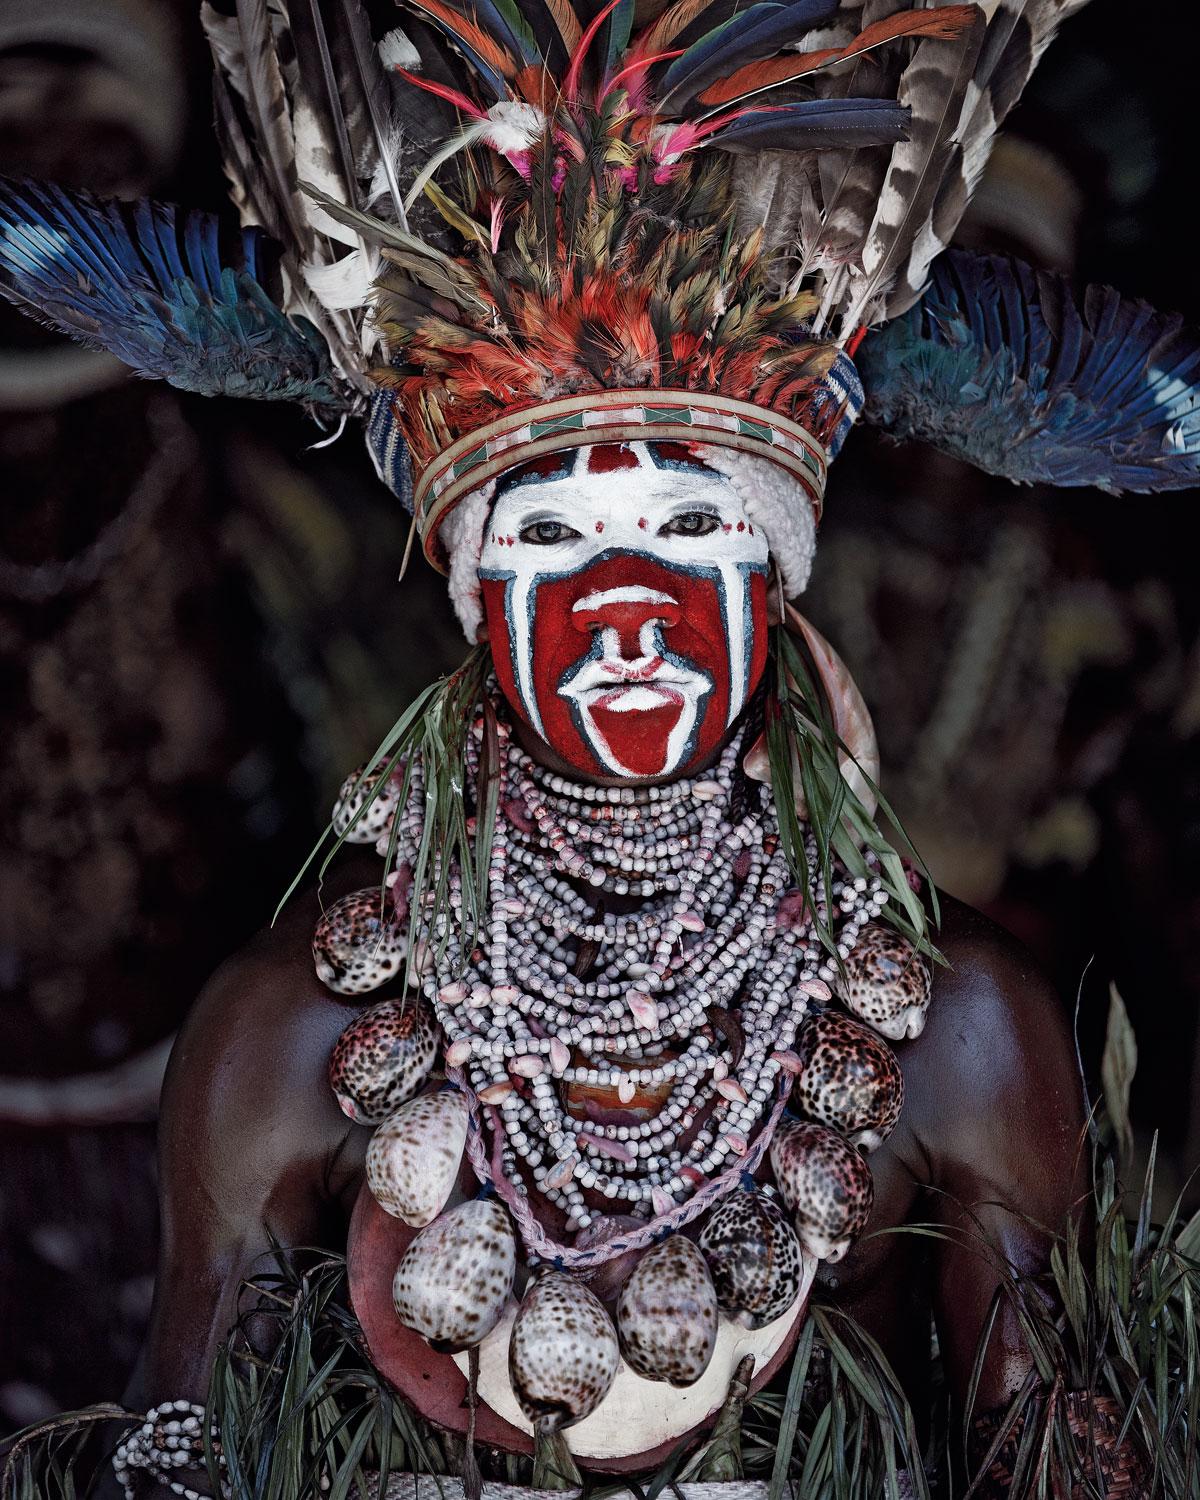 "XV 77 - Kui East Wigman - Mount Hagen, Western Highlands -Papua New Guinea, 2010

Papua is where we started our two-month trip in Oceania. As a region it’s a lot easier to travel through than New Guinea, because it’s part of Indonesia and therefore